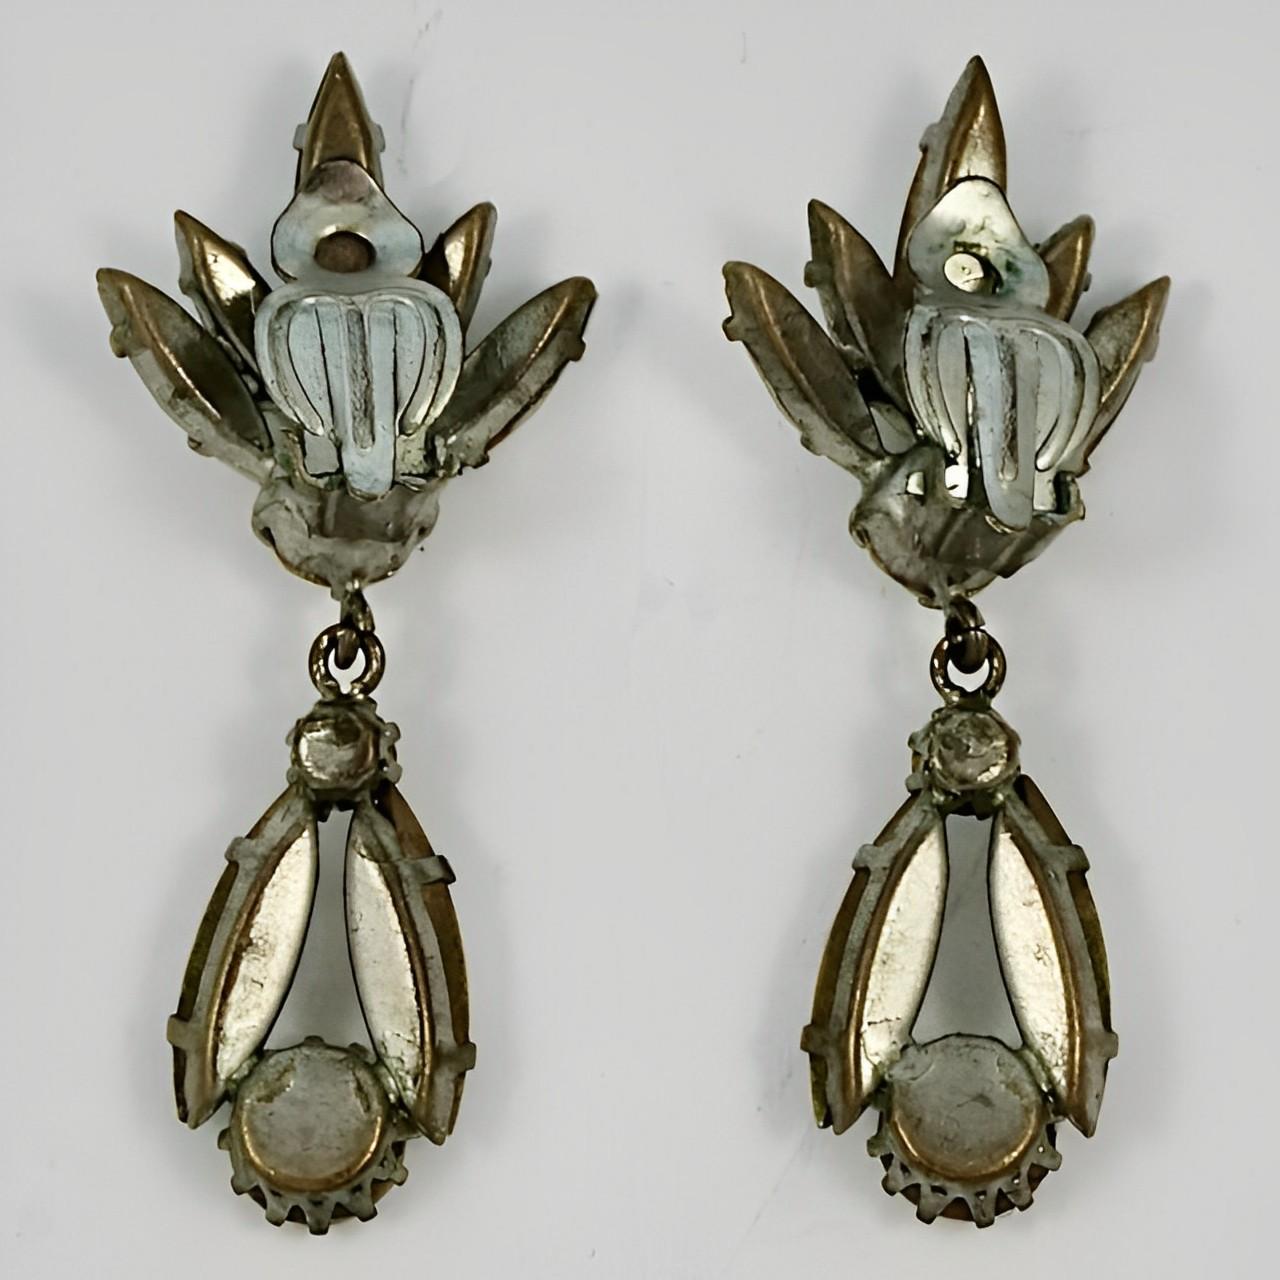 Beautiful silver tone drop clip earrings featuring marquise and round rhinestones. Measuring length 4.9 cm / 1.9 inches

These are stylish vintage drop earrings, circa 1950s. Wonderful for evening  or special occasion wear.